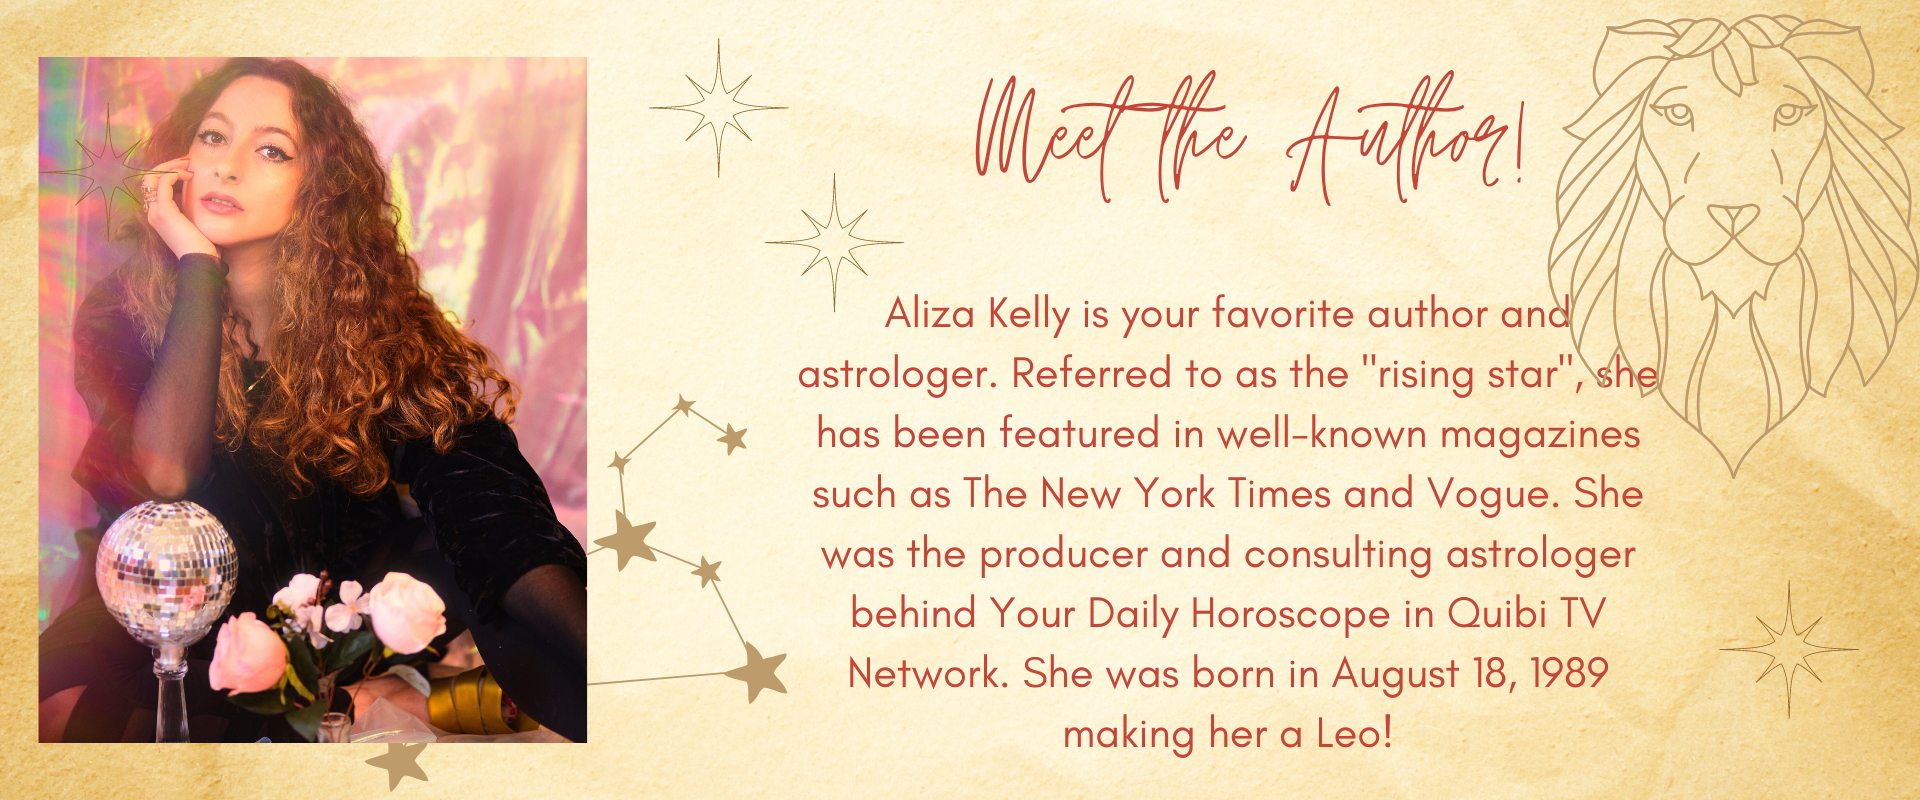 Aliza Kelly is the author of the book. Information about Aliza Kelly